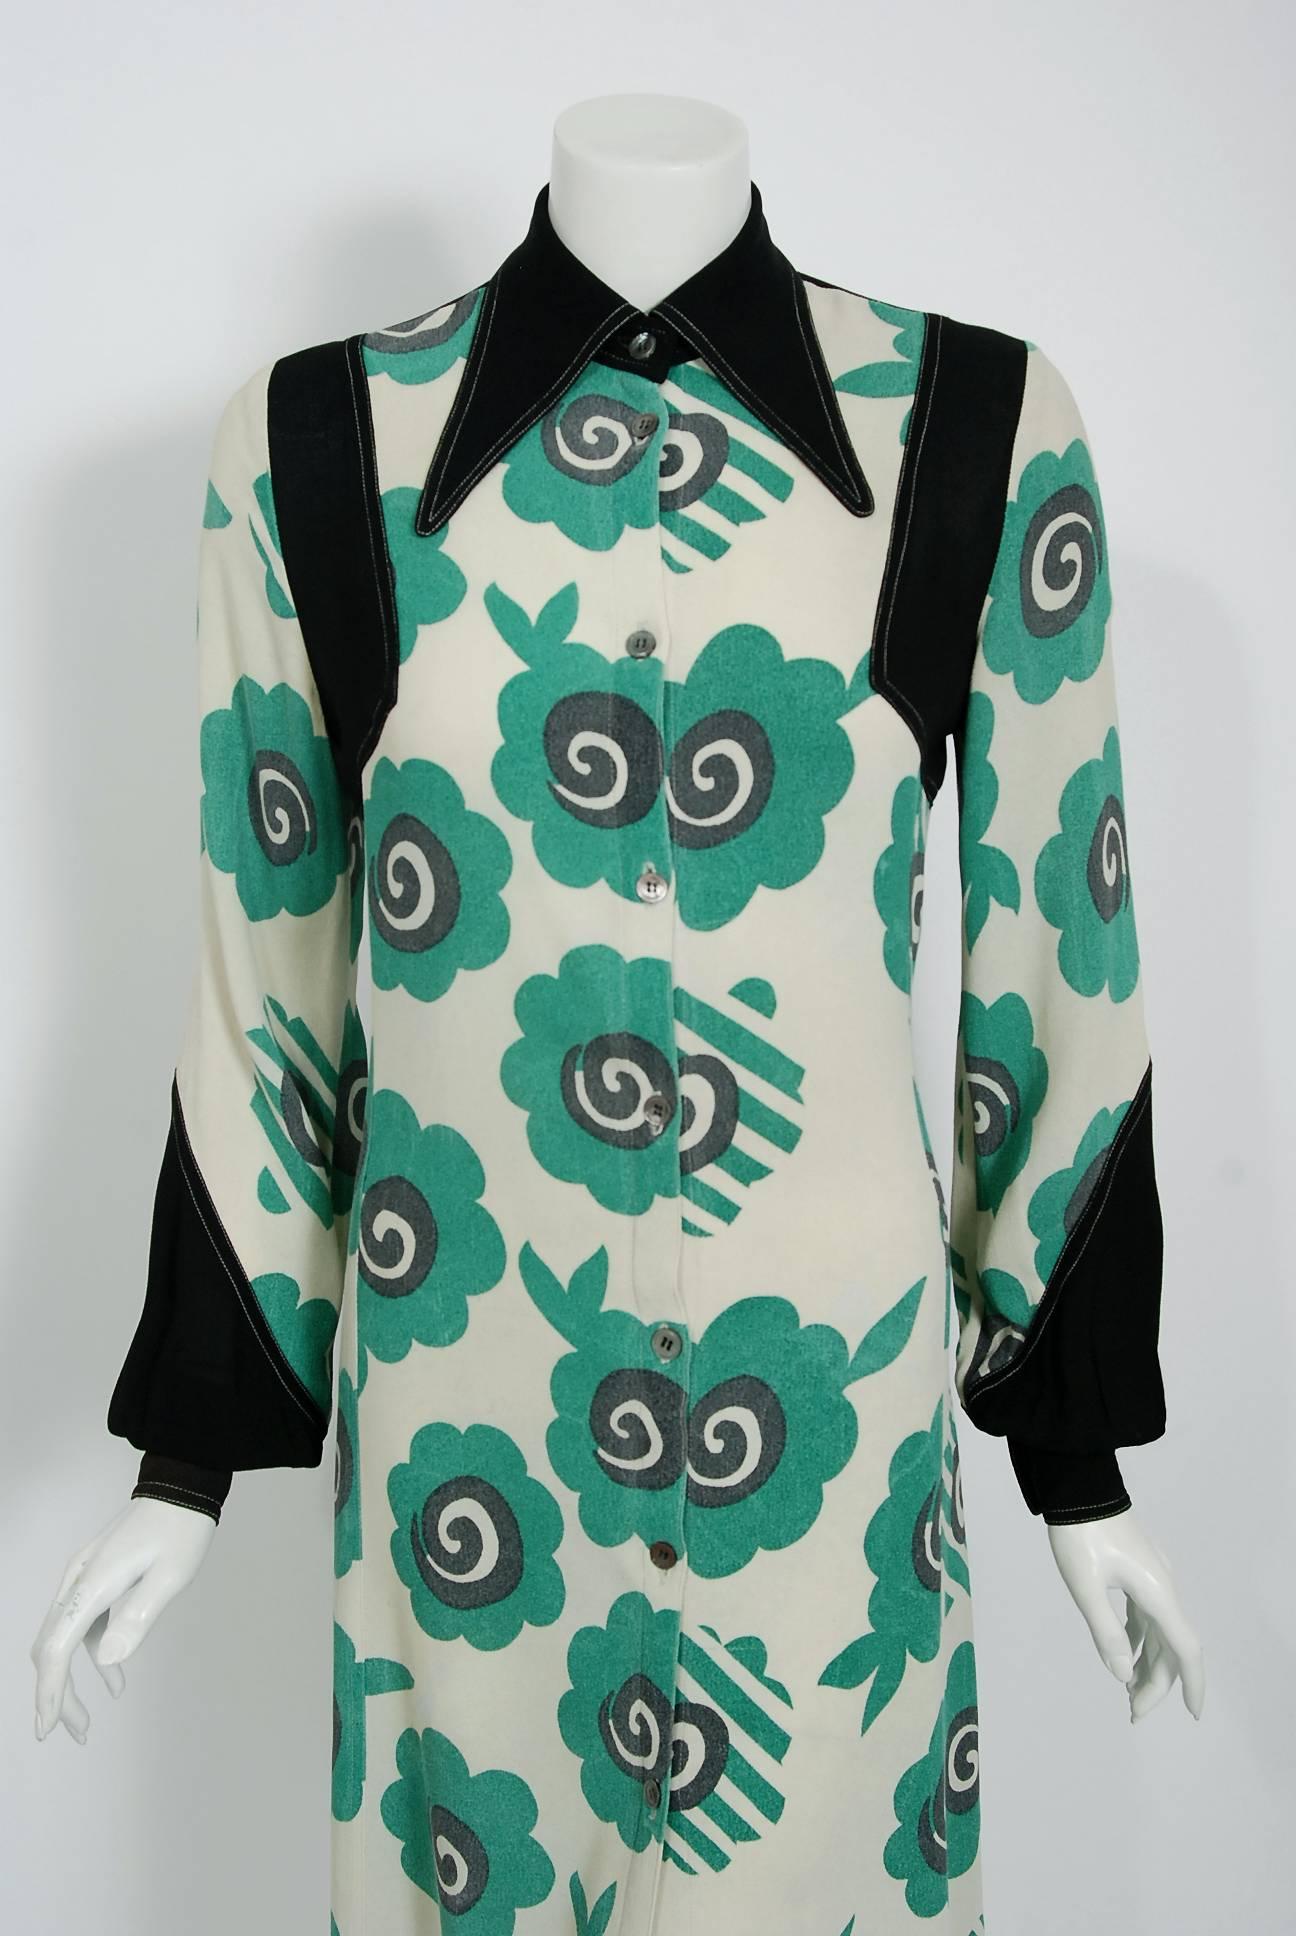 Sensational Ossie Clark 'Candy Flower' print documented dress dating back to his 1969 collection. English fashion designer, Raymond Ossie Clark, was a leading light in the London 